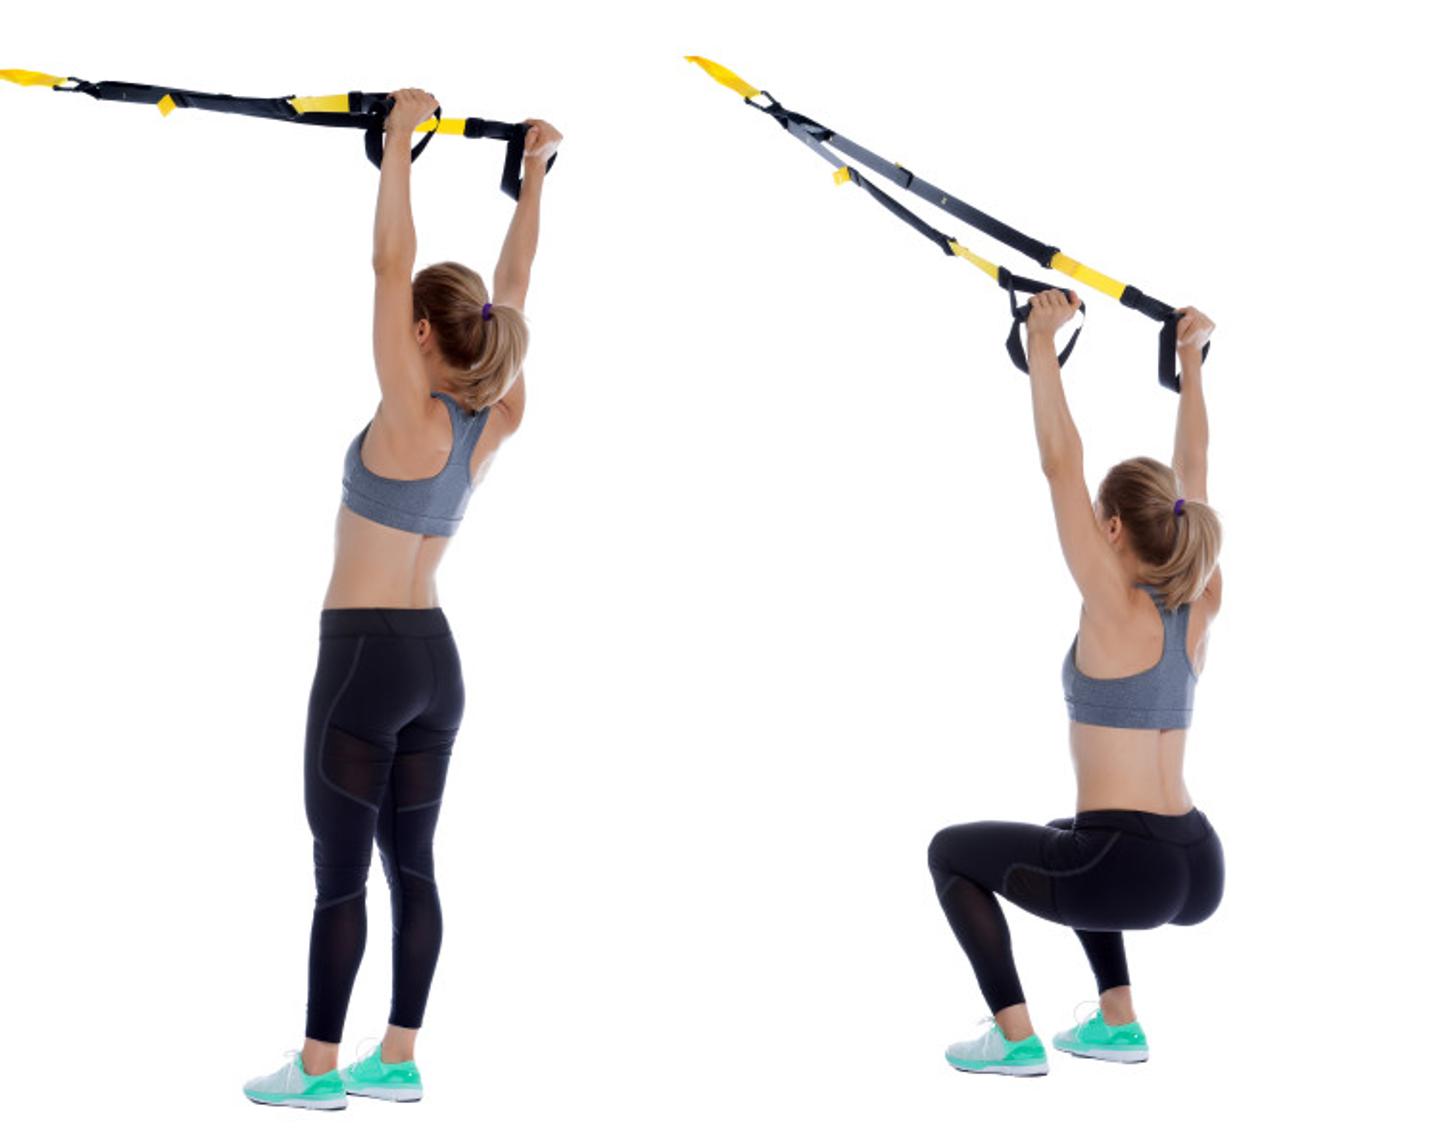 ISSA, International Sports Sciences Association, Certified Personal Trainer, ISSAonline, ISSA x TRX: Best TRX Exercises to Enhance Your Training Squats